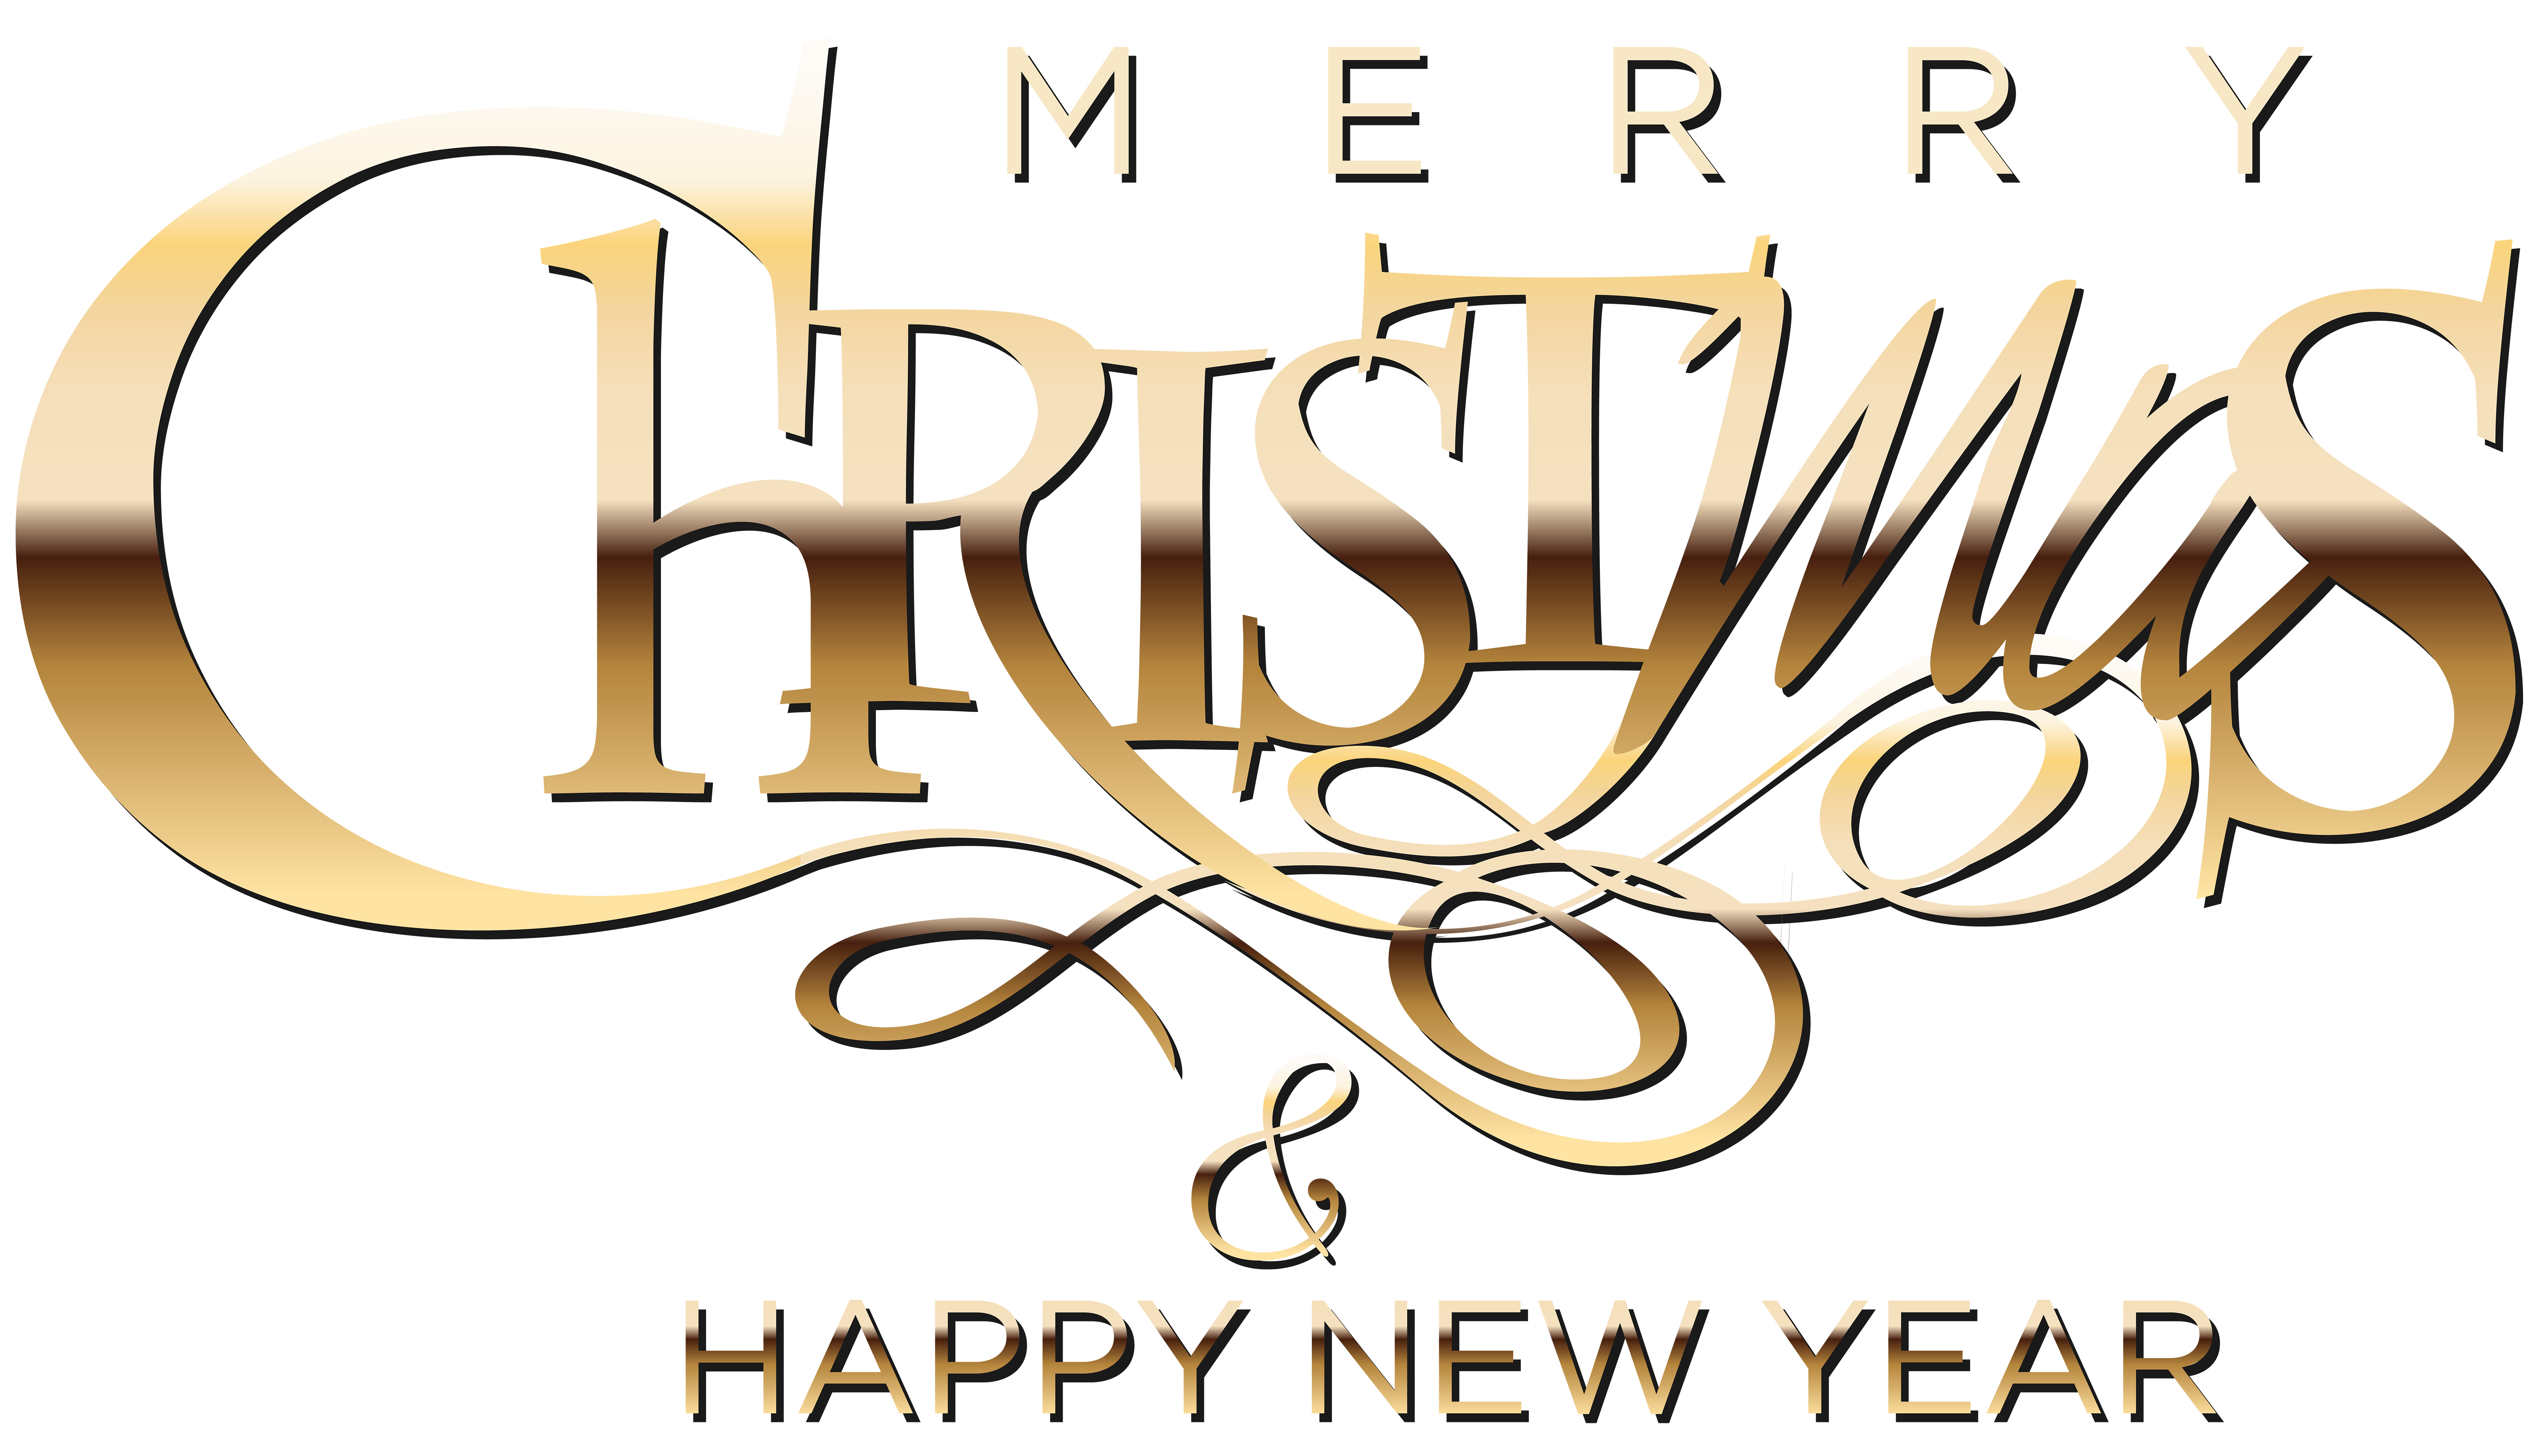 Merry Christmas and Happy New Year Clip Art Image | Gallery